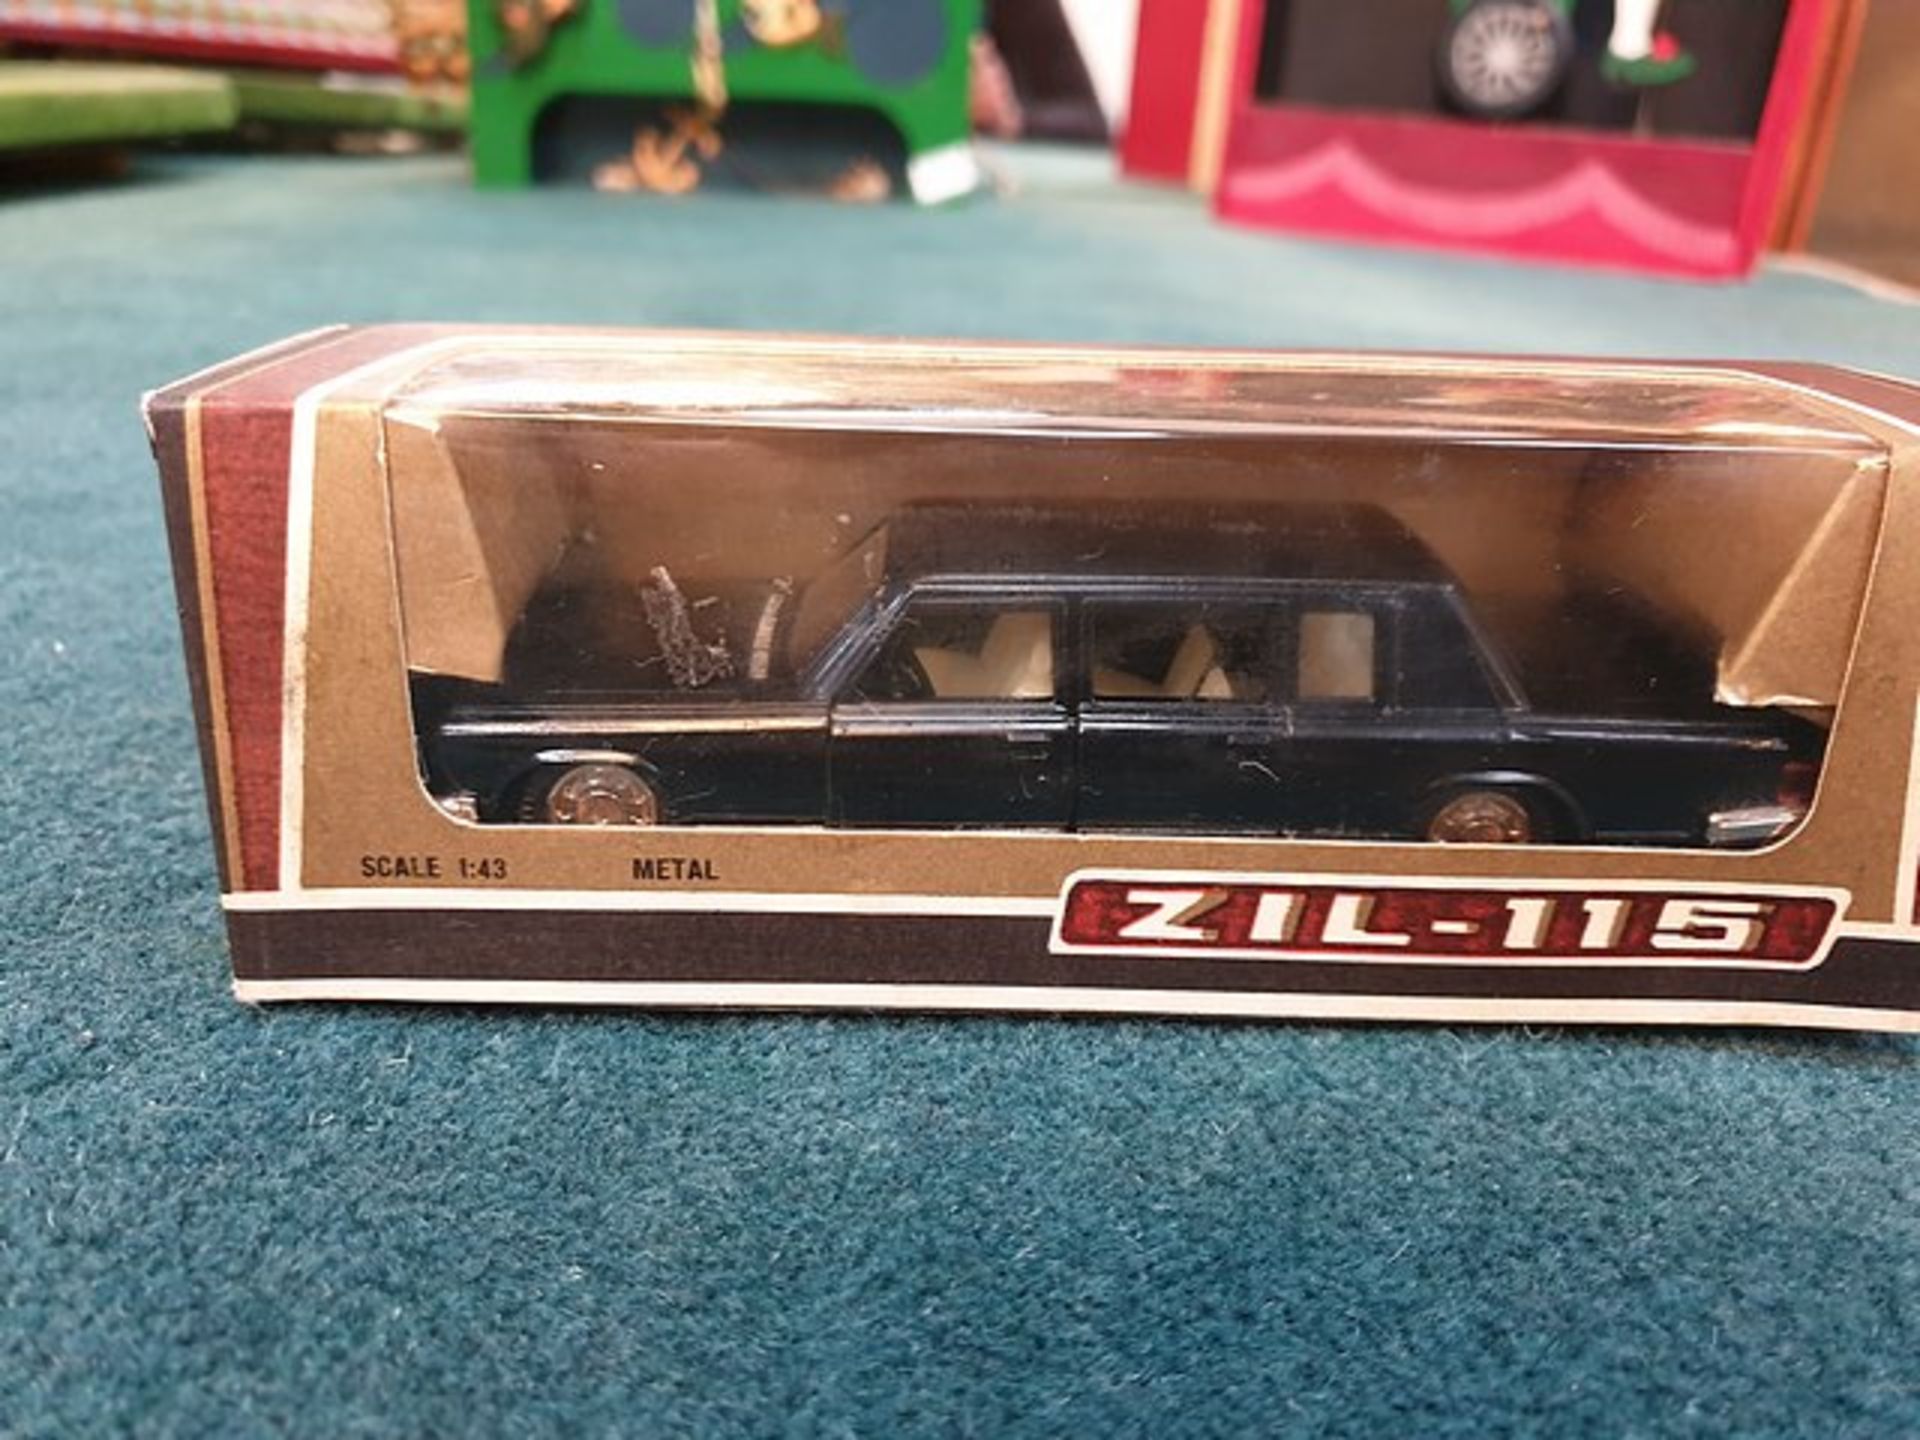 Novoexport (Russia) Diecast Made In USSR Russian ZIL.115 Limousine Scale 1/43 Boxed